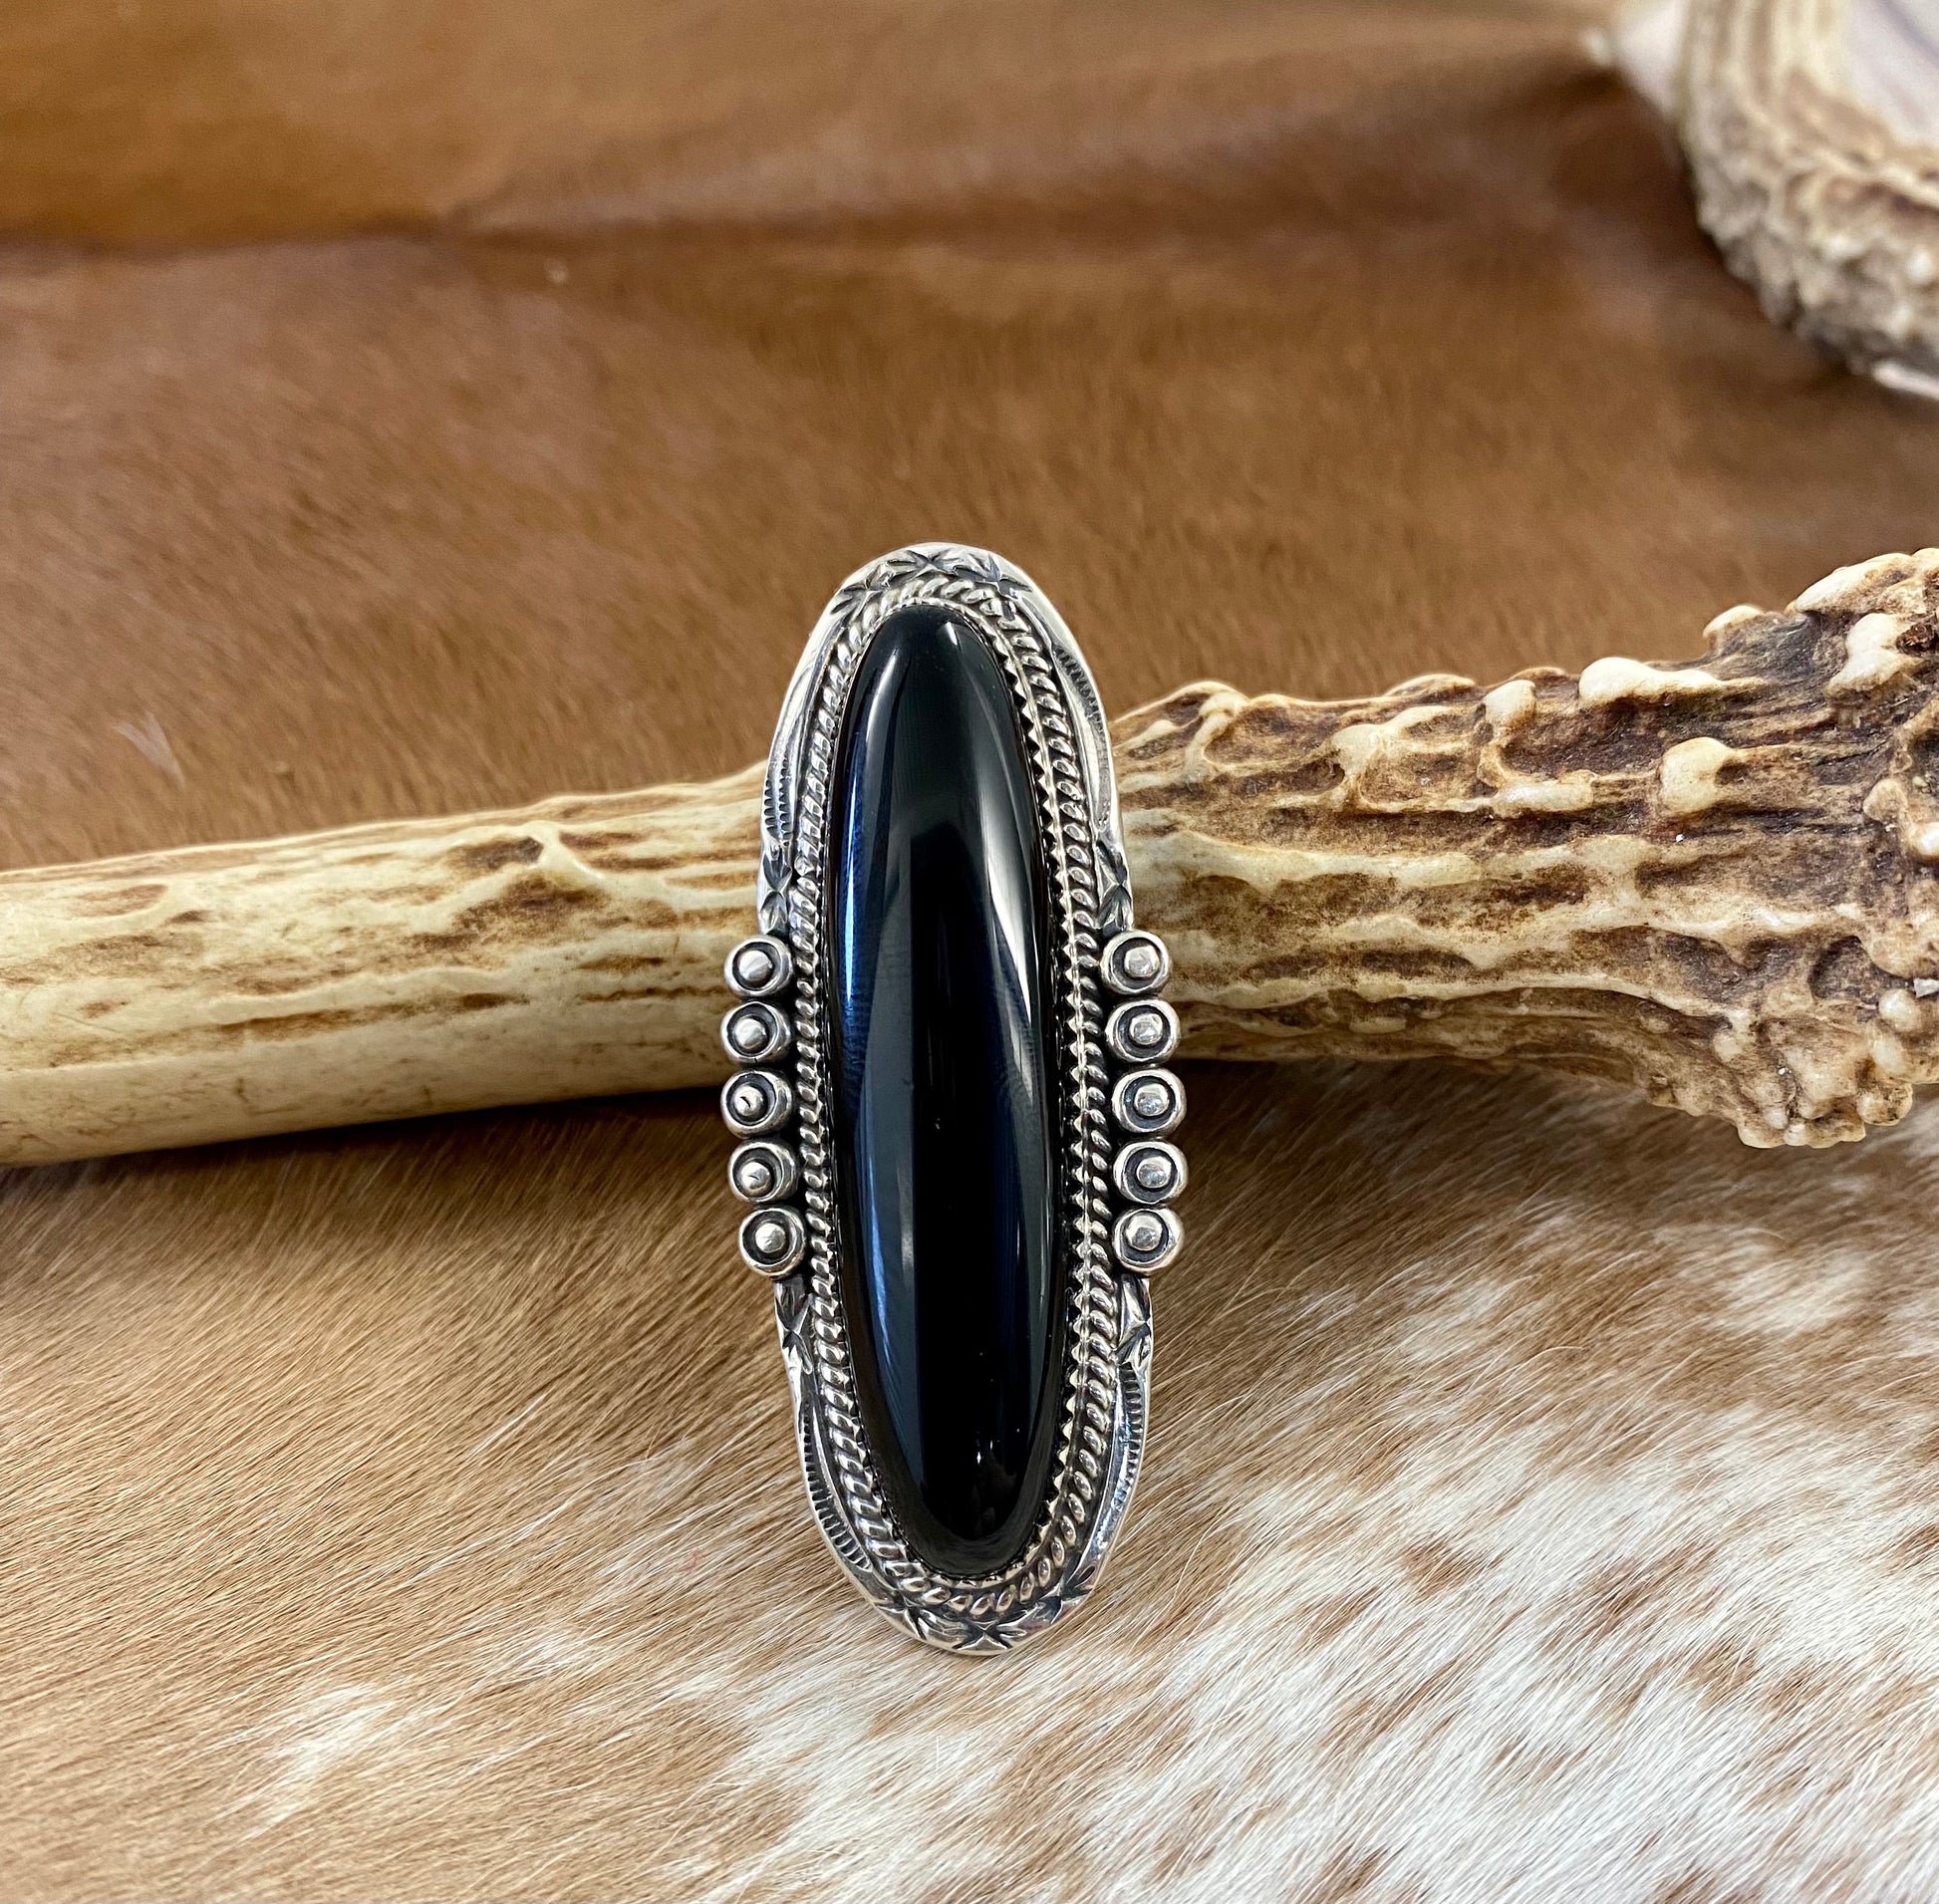 Large sterling silver onyx single stone Native made statement size 8.5 ring. Stamped sterling and signed PY by Native American artist silversmith Phillip Yazzie.  The perfect piece to add to anyone's jewelry collection.   Size: 2 1/4” inches length x 1” inch width   Ring Size: 8.5  Signed: YES "PY"  Hallmark/Artist: Phillip Yazzie  Stone: Onyx